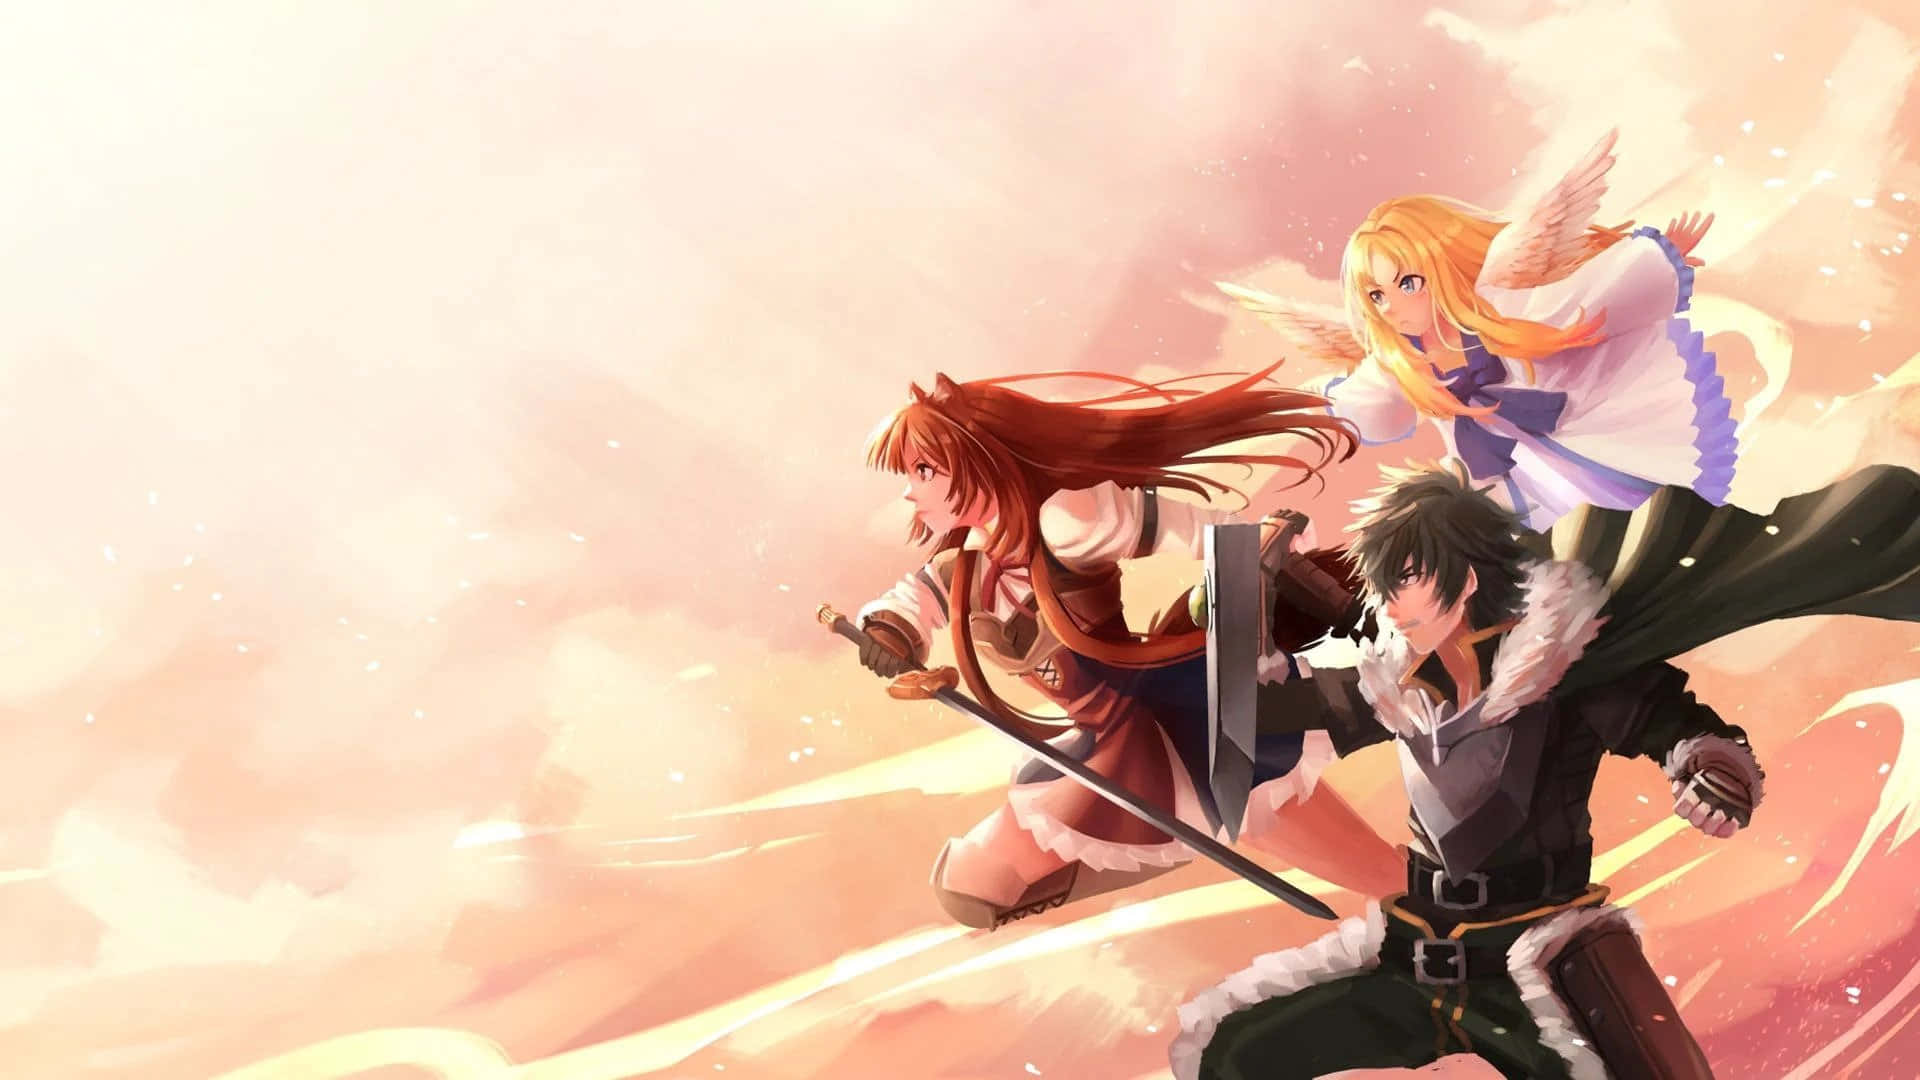 A shield hero stands tall in battle